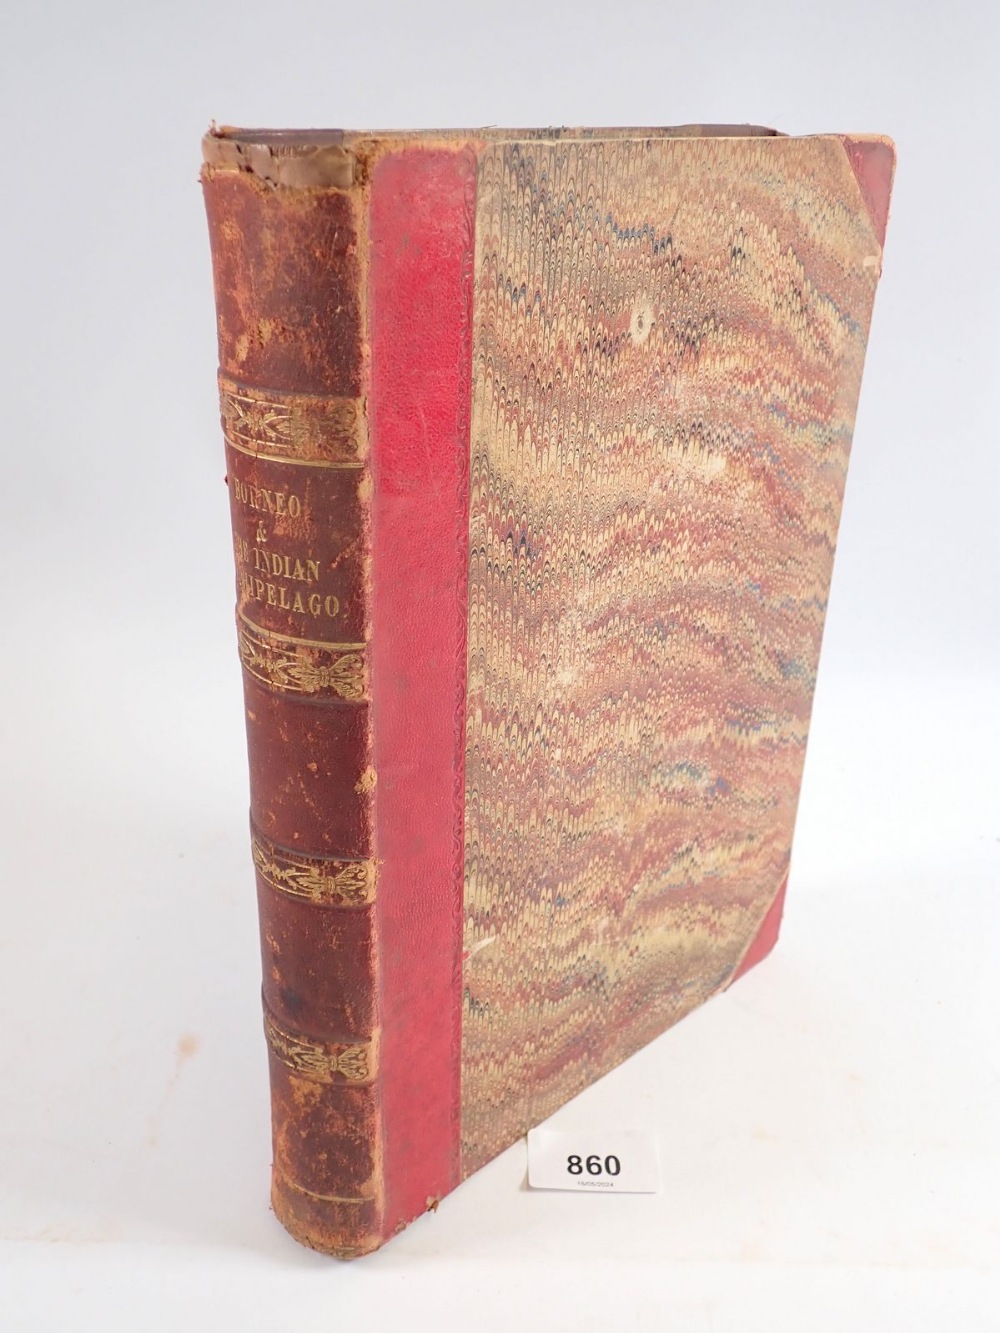 Borneo and The Indian Archipelago by Frank S Marryat, published Longman Brown, Green & Longmans 1848